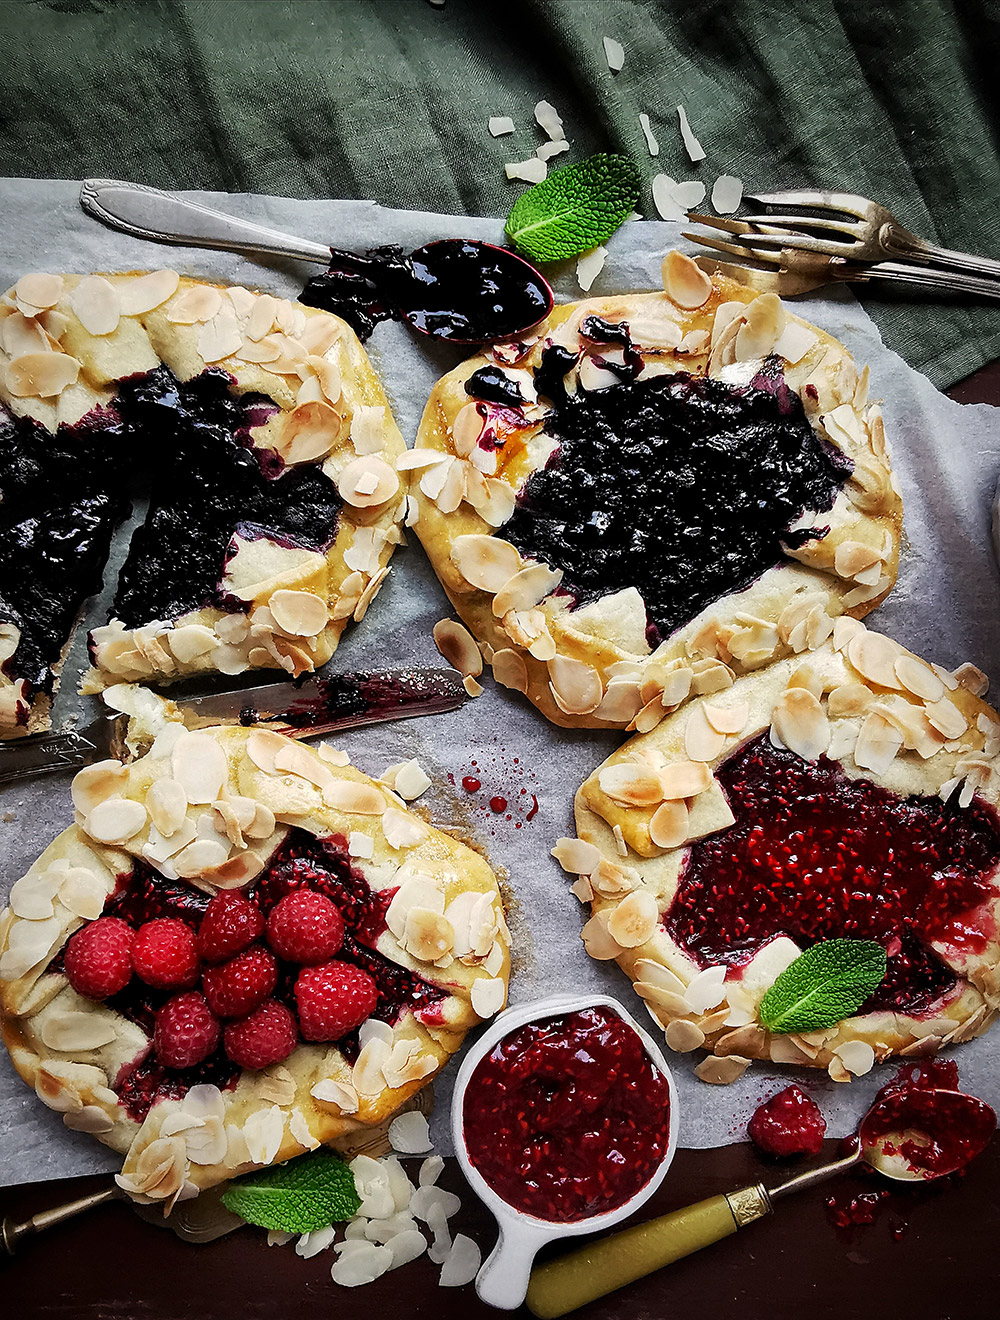 Blueberry and raspberry rustic tarts